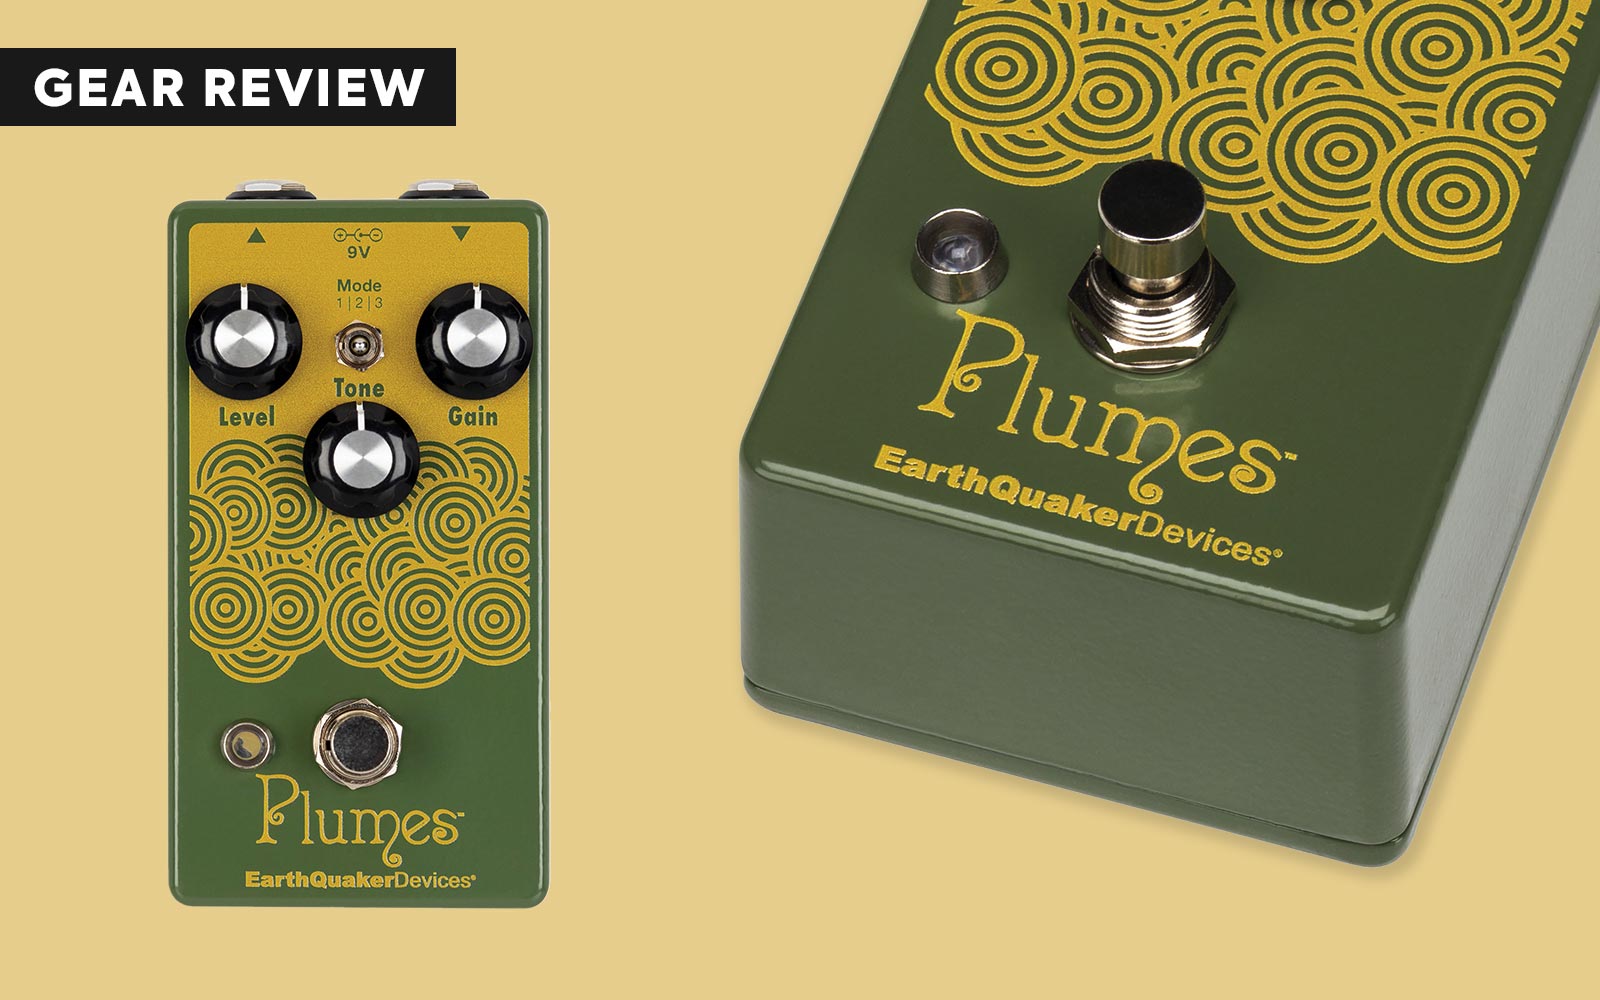 Gear Review: Plumes by EarthQuaker Devices | Tom Tom Magazine